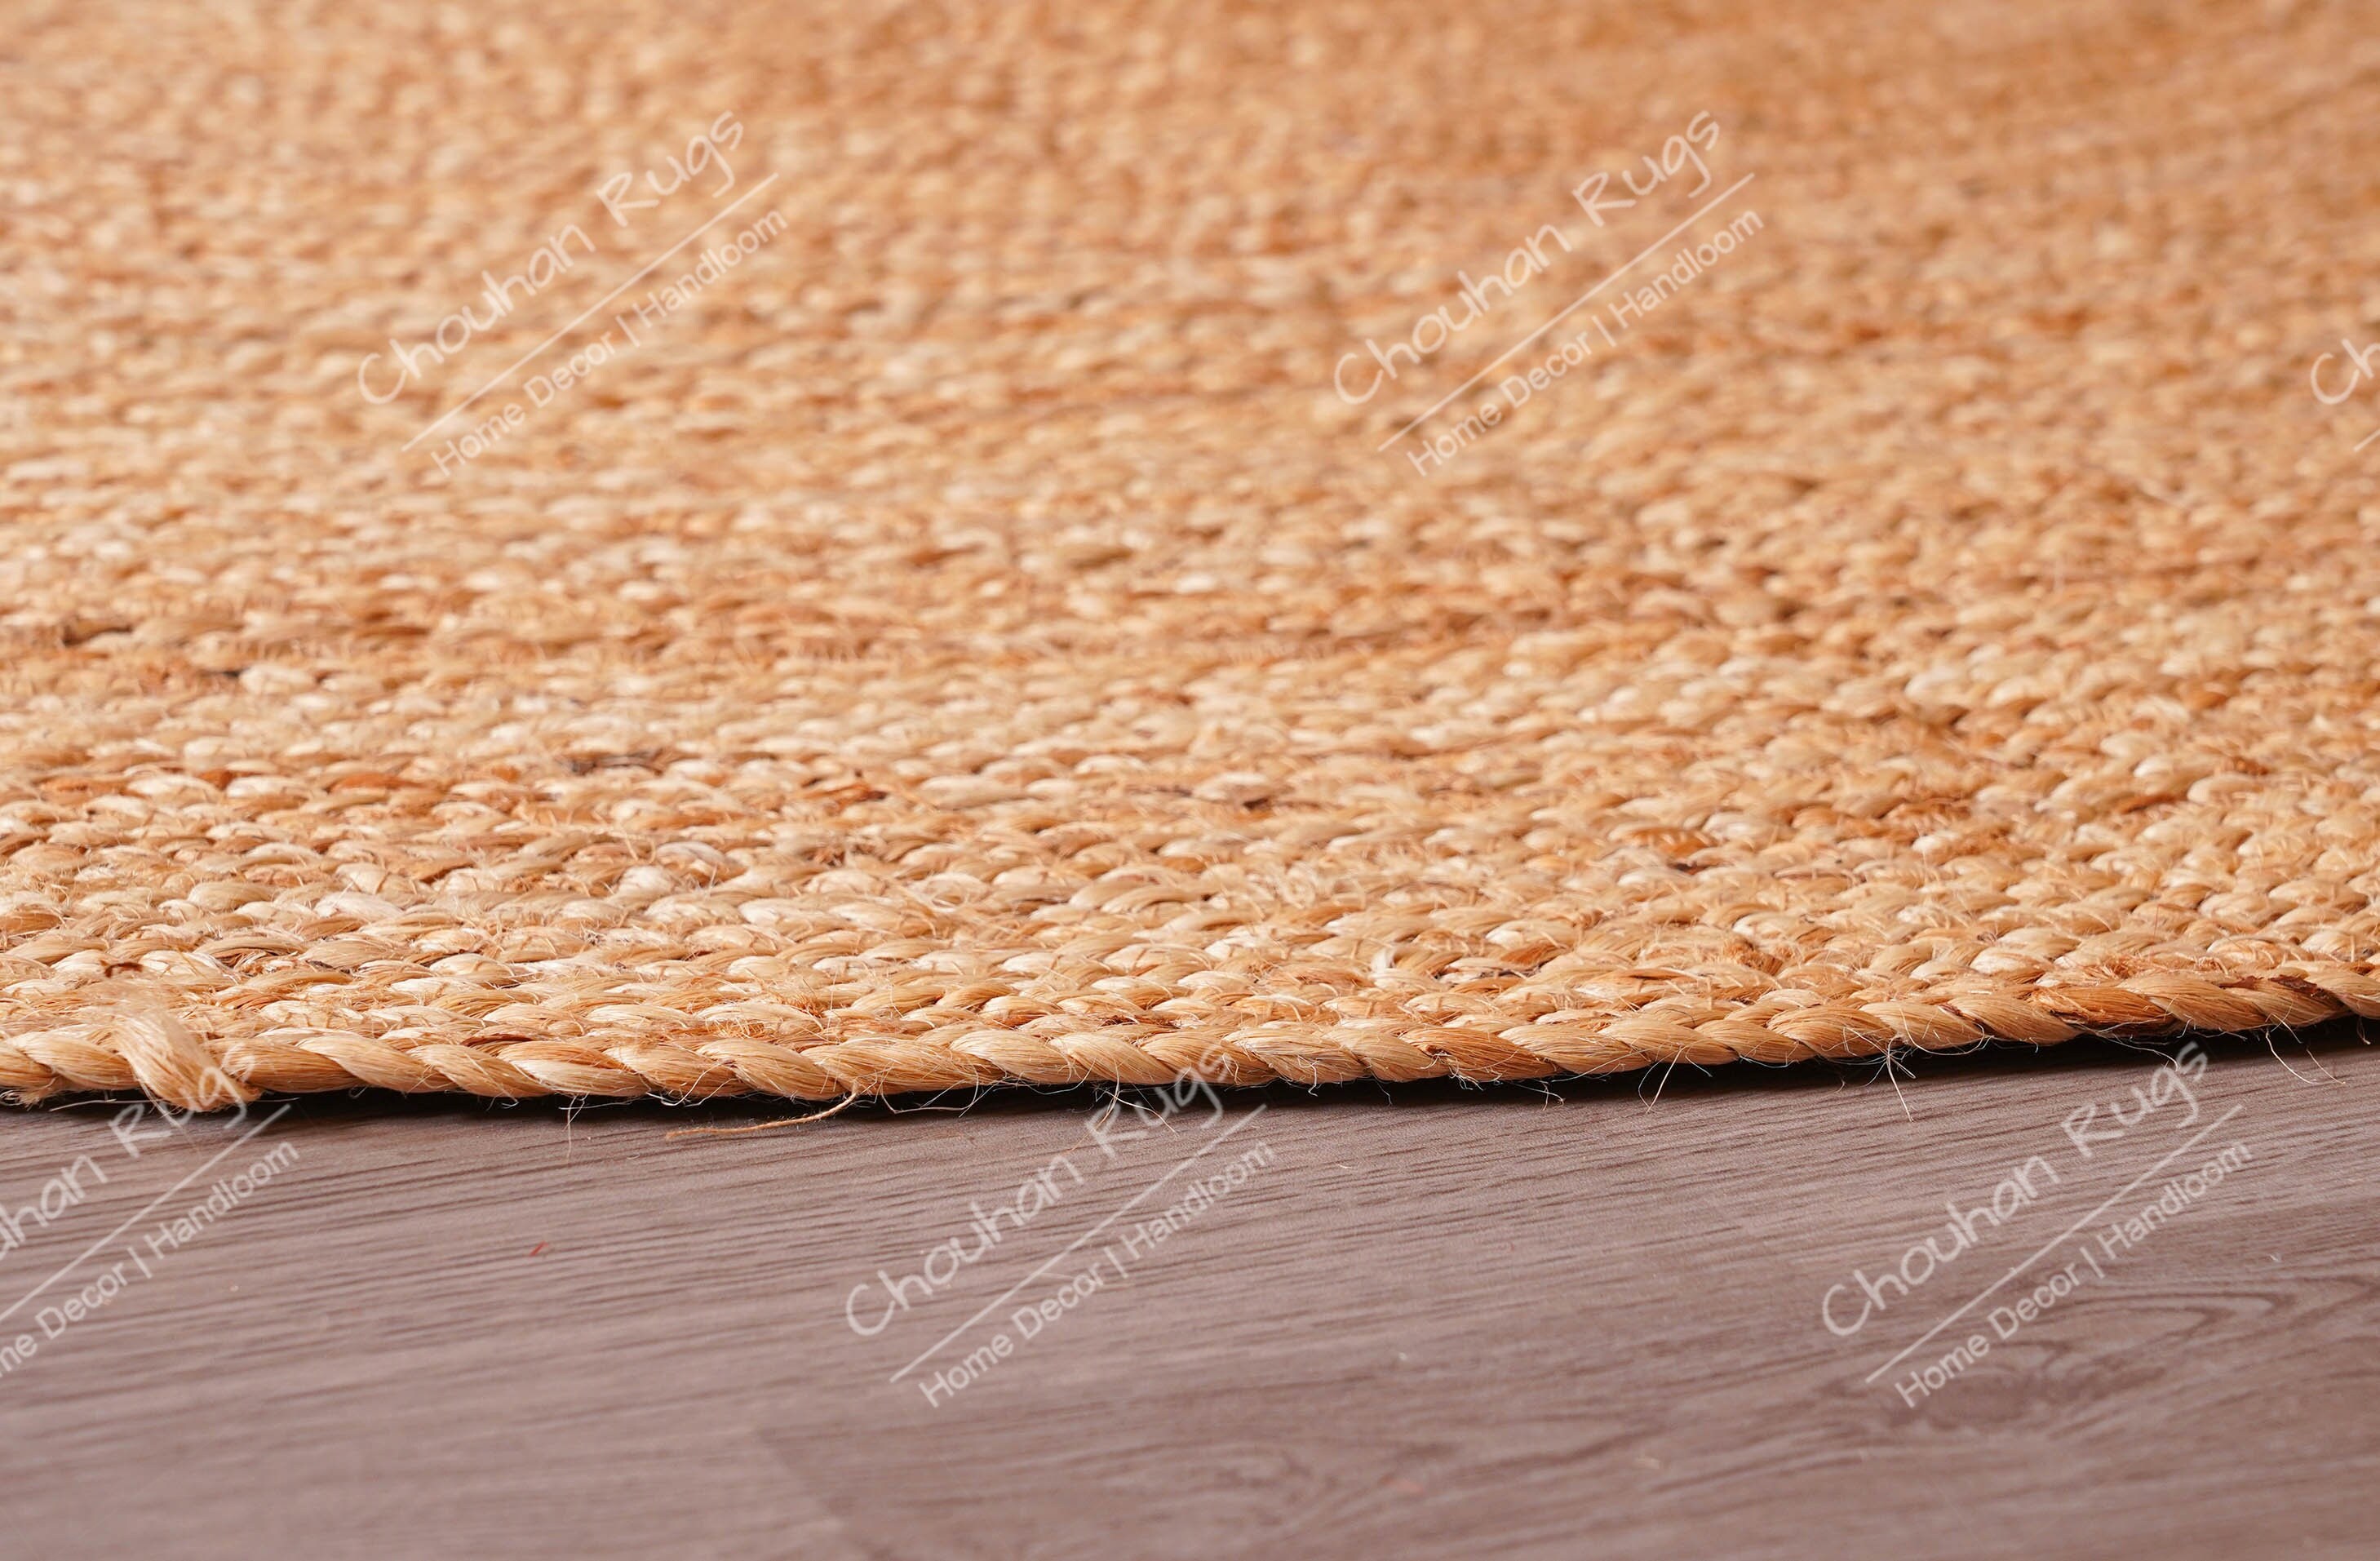 4 Foot Round Braided Design Natural Jute and Polyester Blend Indoor Area Rug  [FLF-CI-19-3694-4-GG] 